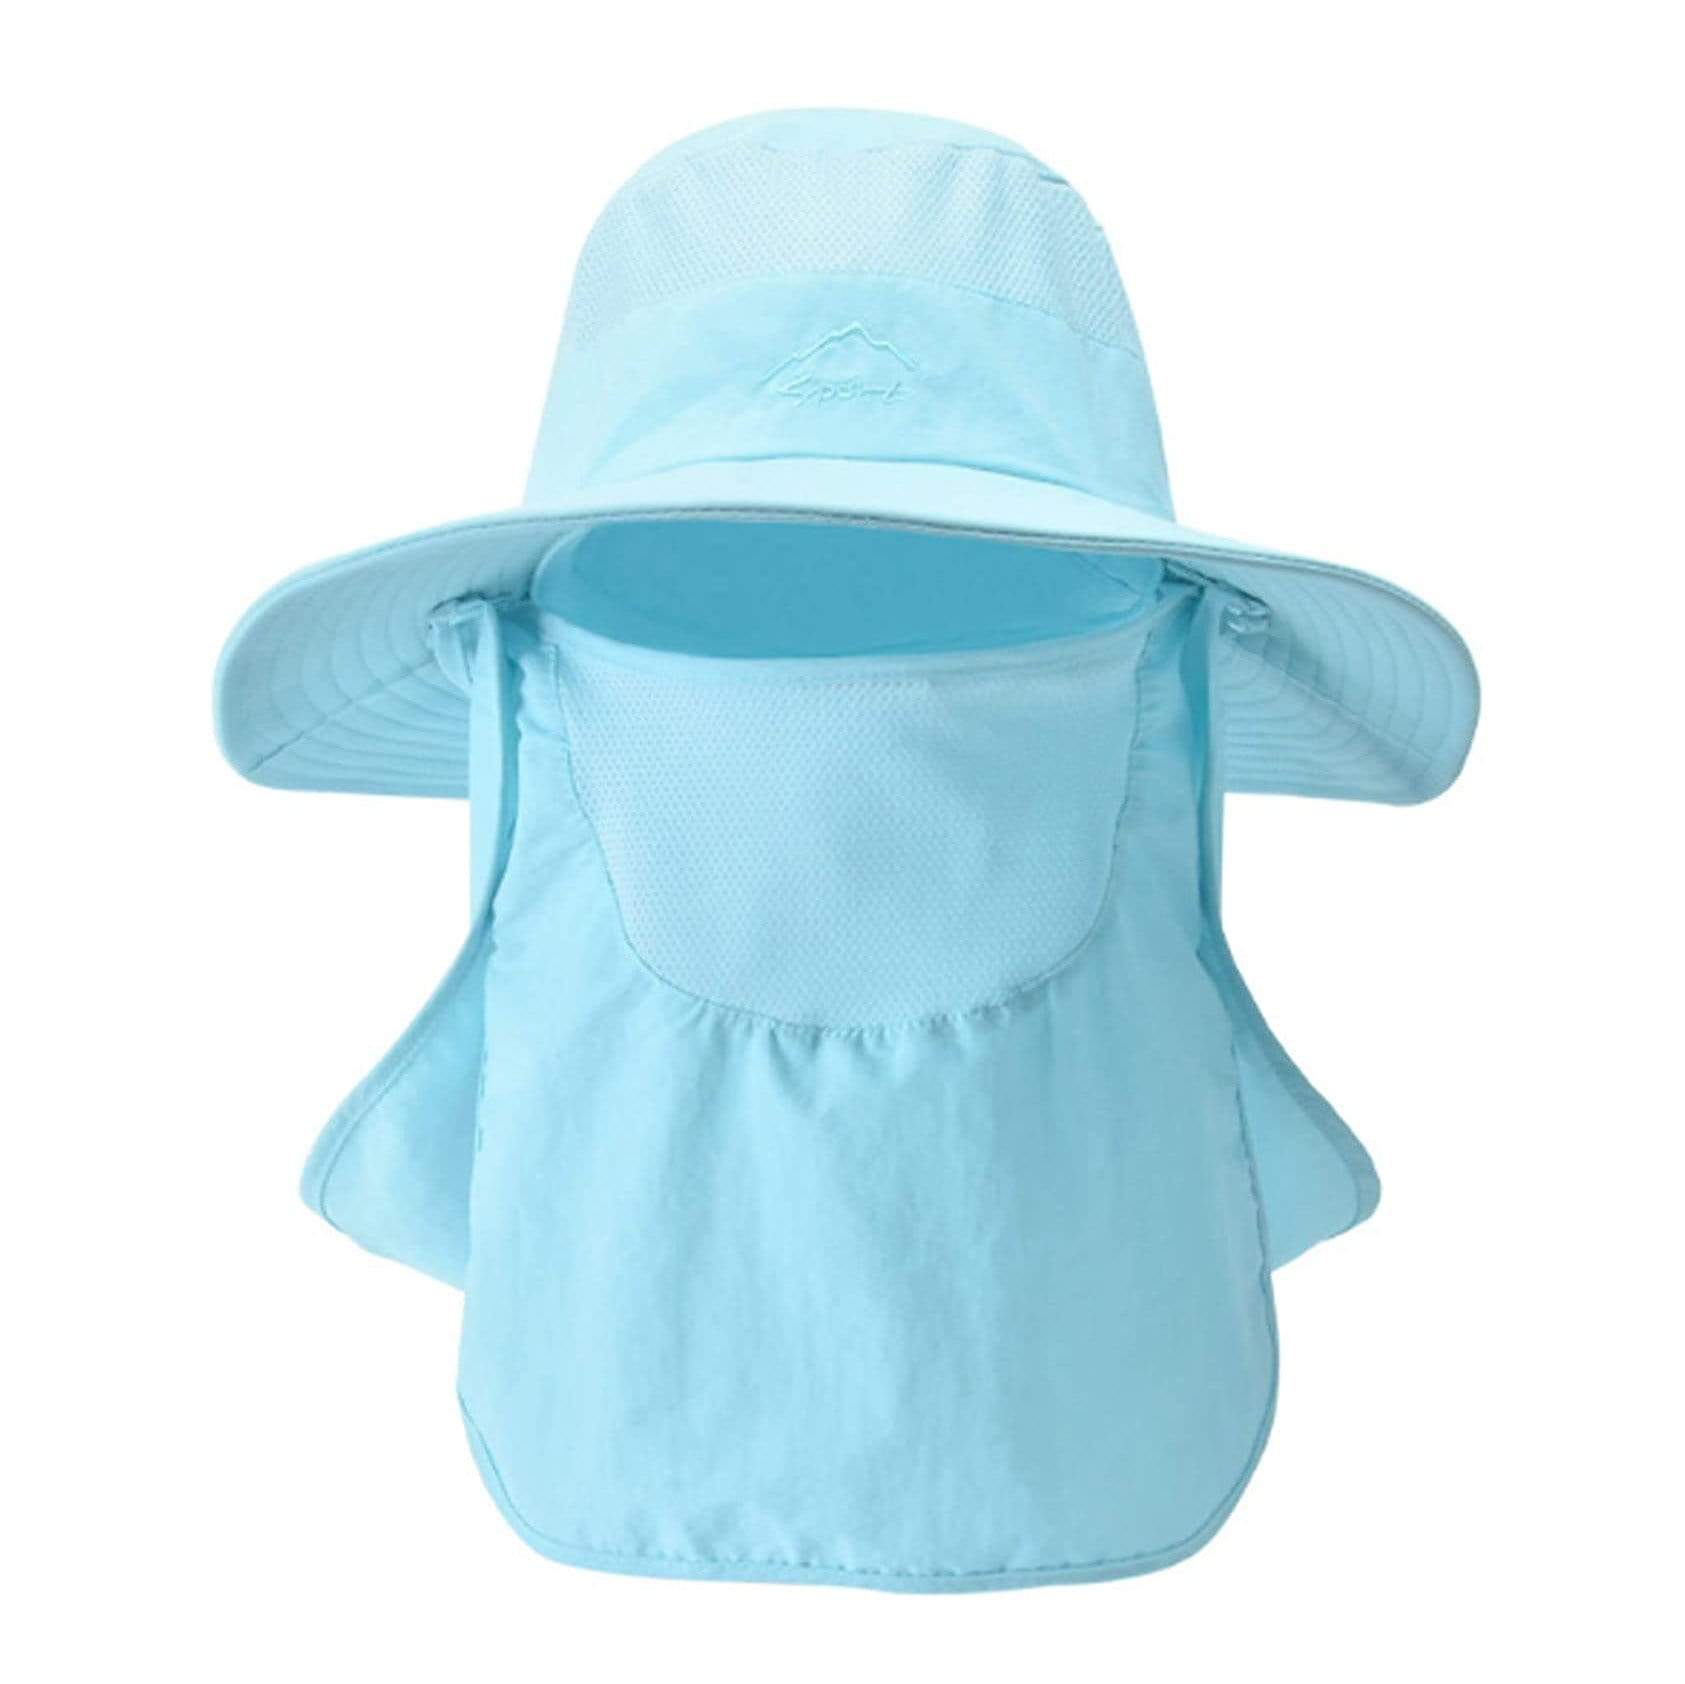 MIERSPORT Fishing Hat Sun Cap with Removable Face Neck Cover, Light Blue